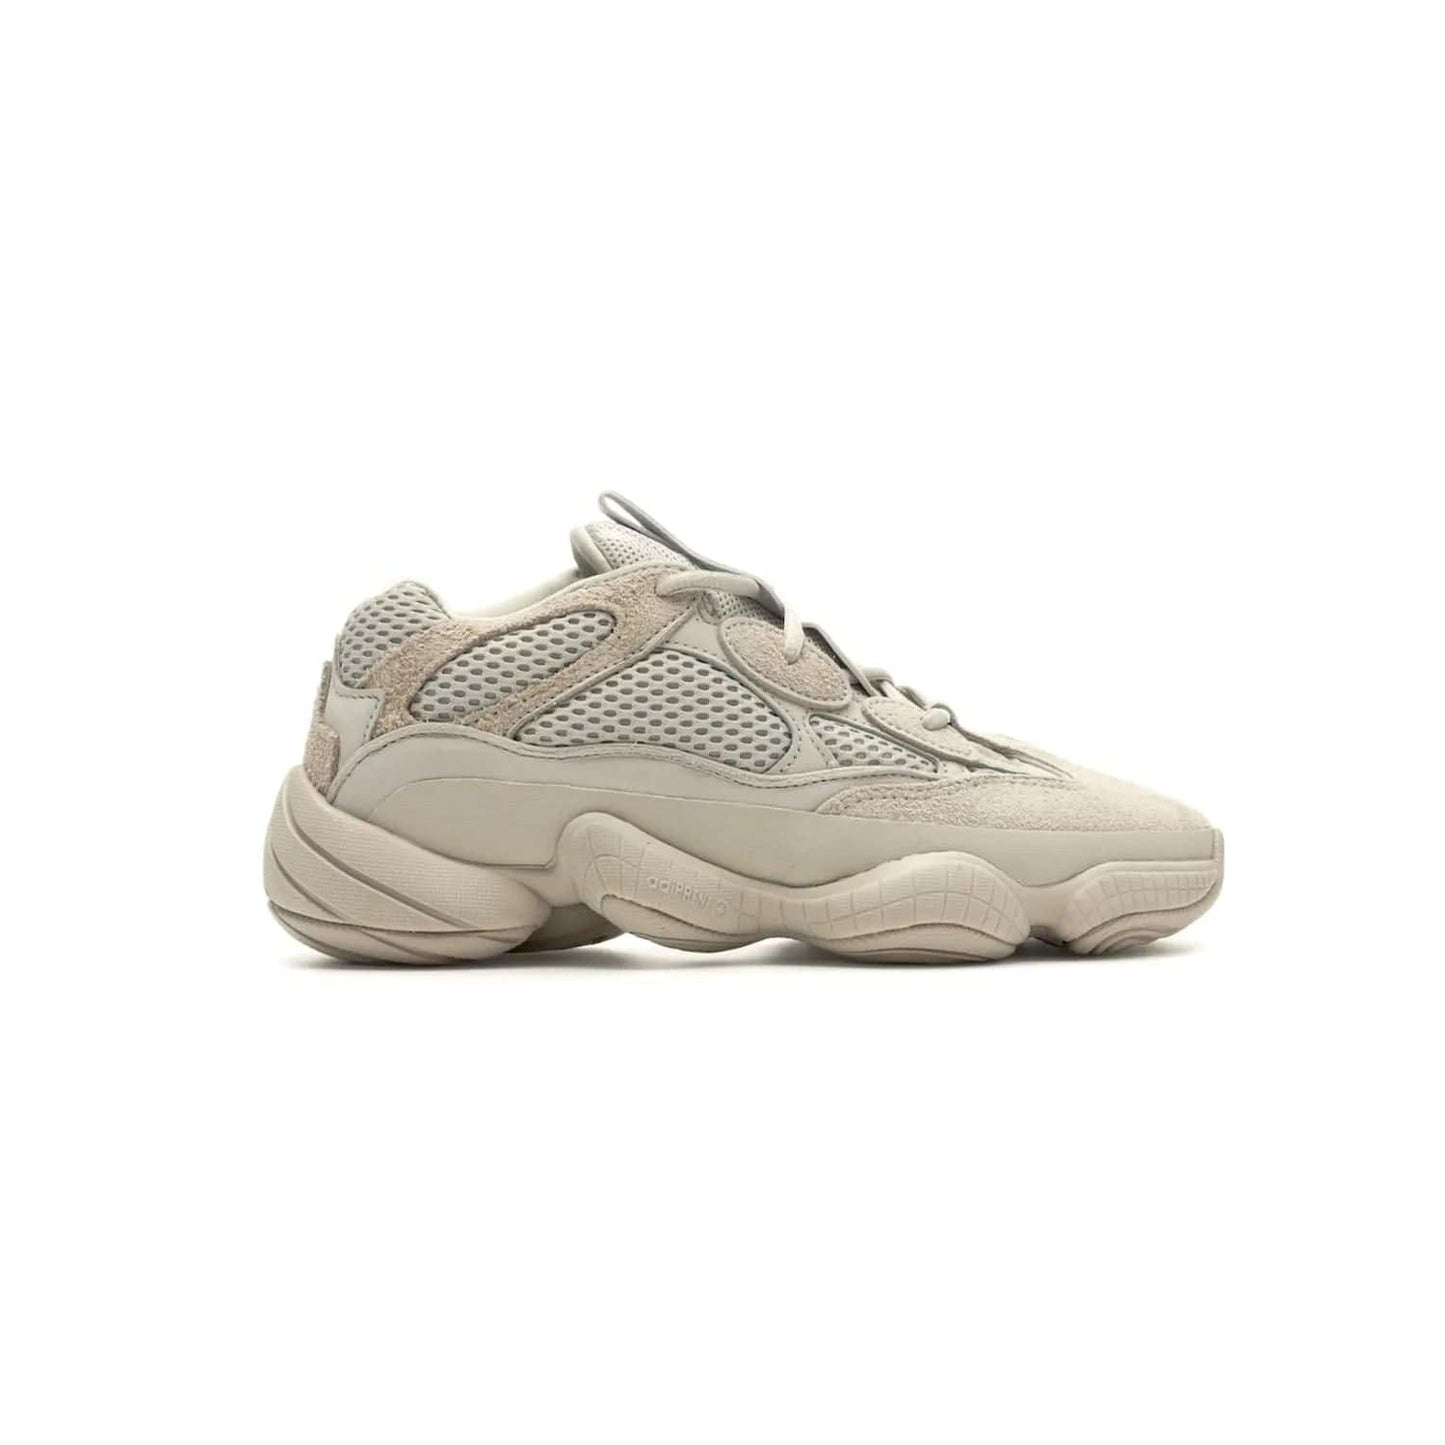 adidas Yeezy 500 Blush - Image 36 - Only at www.BallersClubKickz.com - Step up your sneaker game with the Adidas Yeezy 500 Blush. Monochromatic pale pink palette, hiking-inspired suede/mesh construction, plus adiPRENE sole for comfort and performance. Get the Adidas Yeezy 500 and experience true style and comfort.